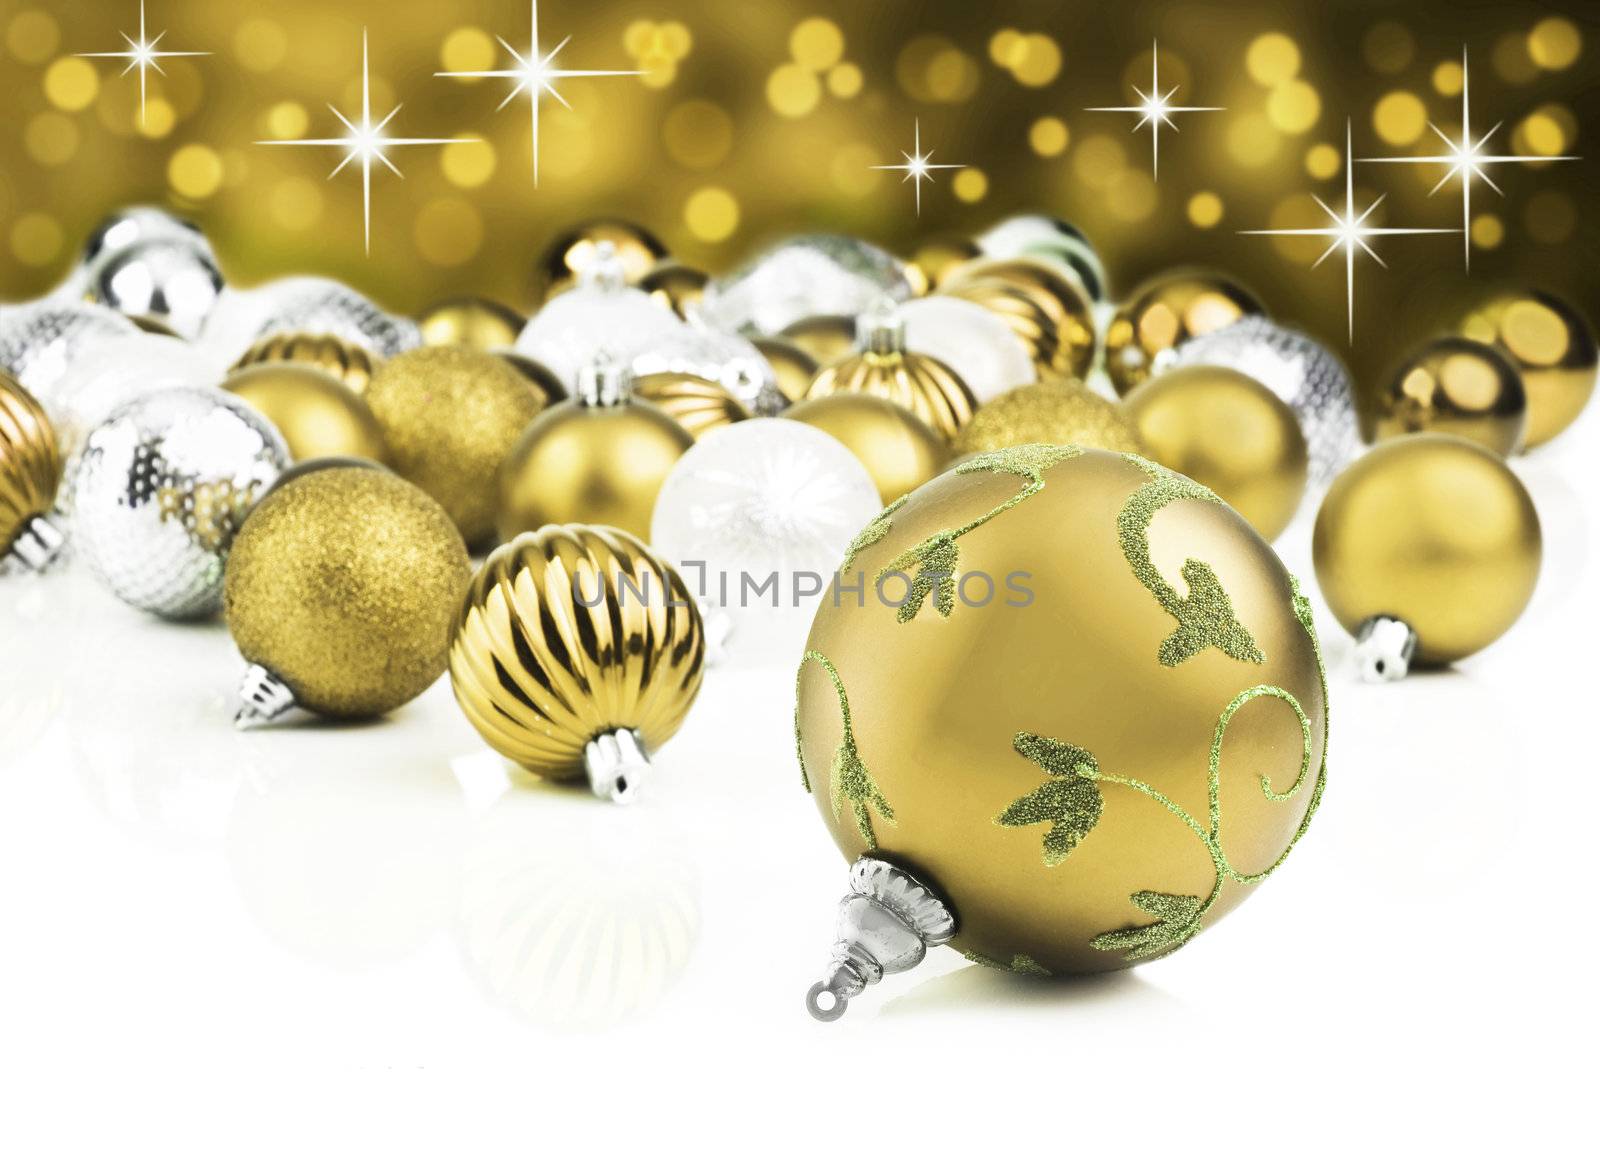 Golden decorative christmas ornaments with star background by tish1